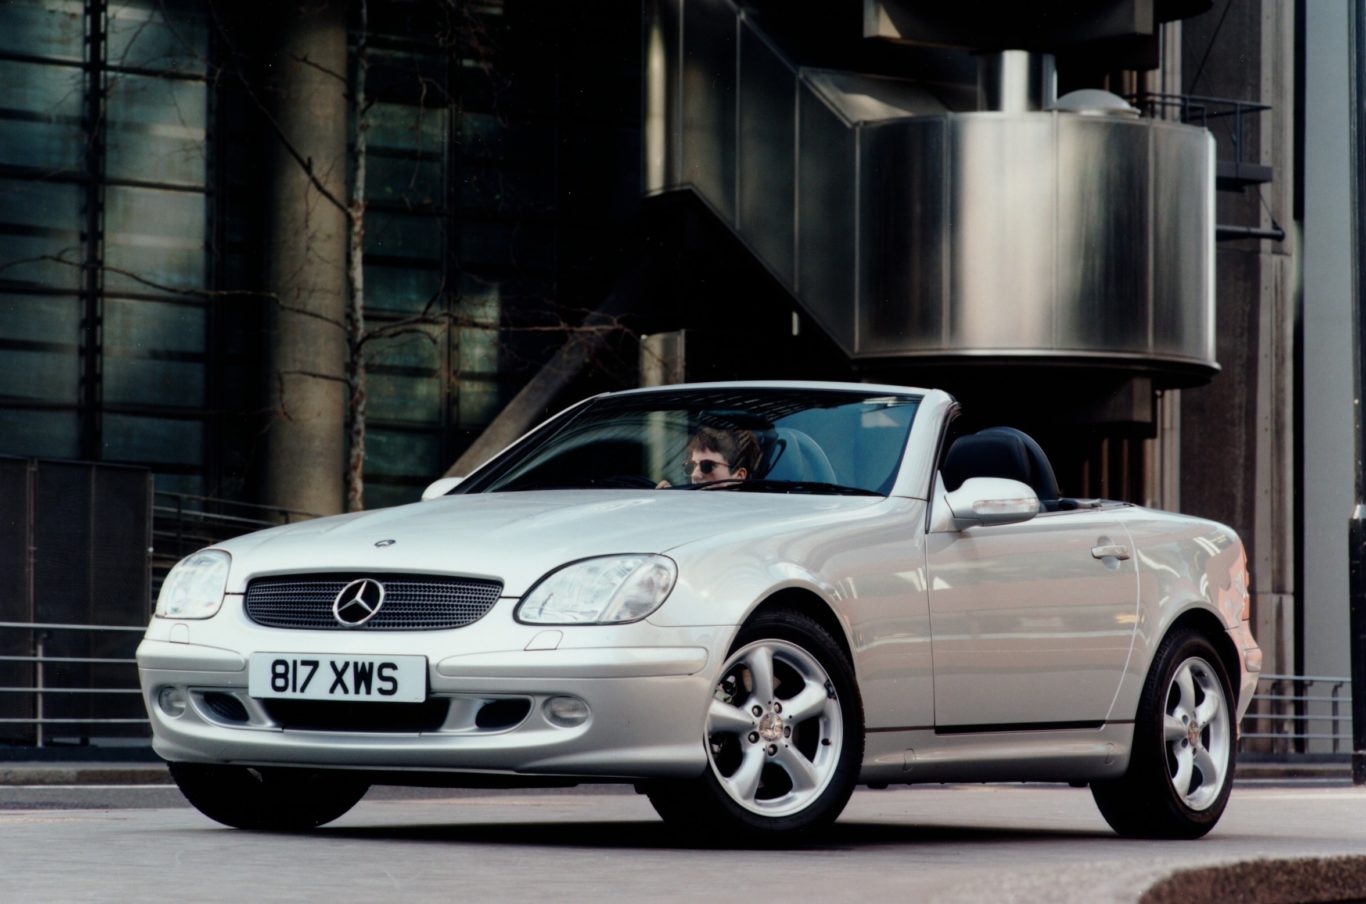 The first-generation SLK remains a well-made product